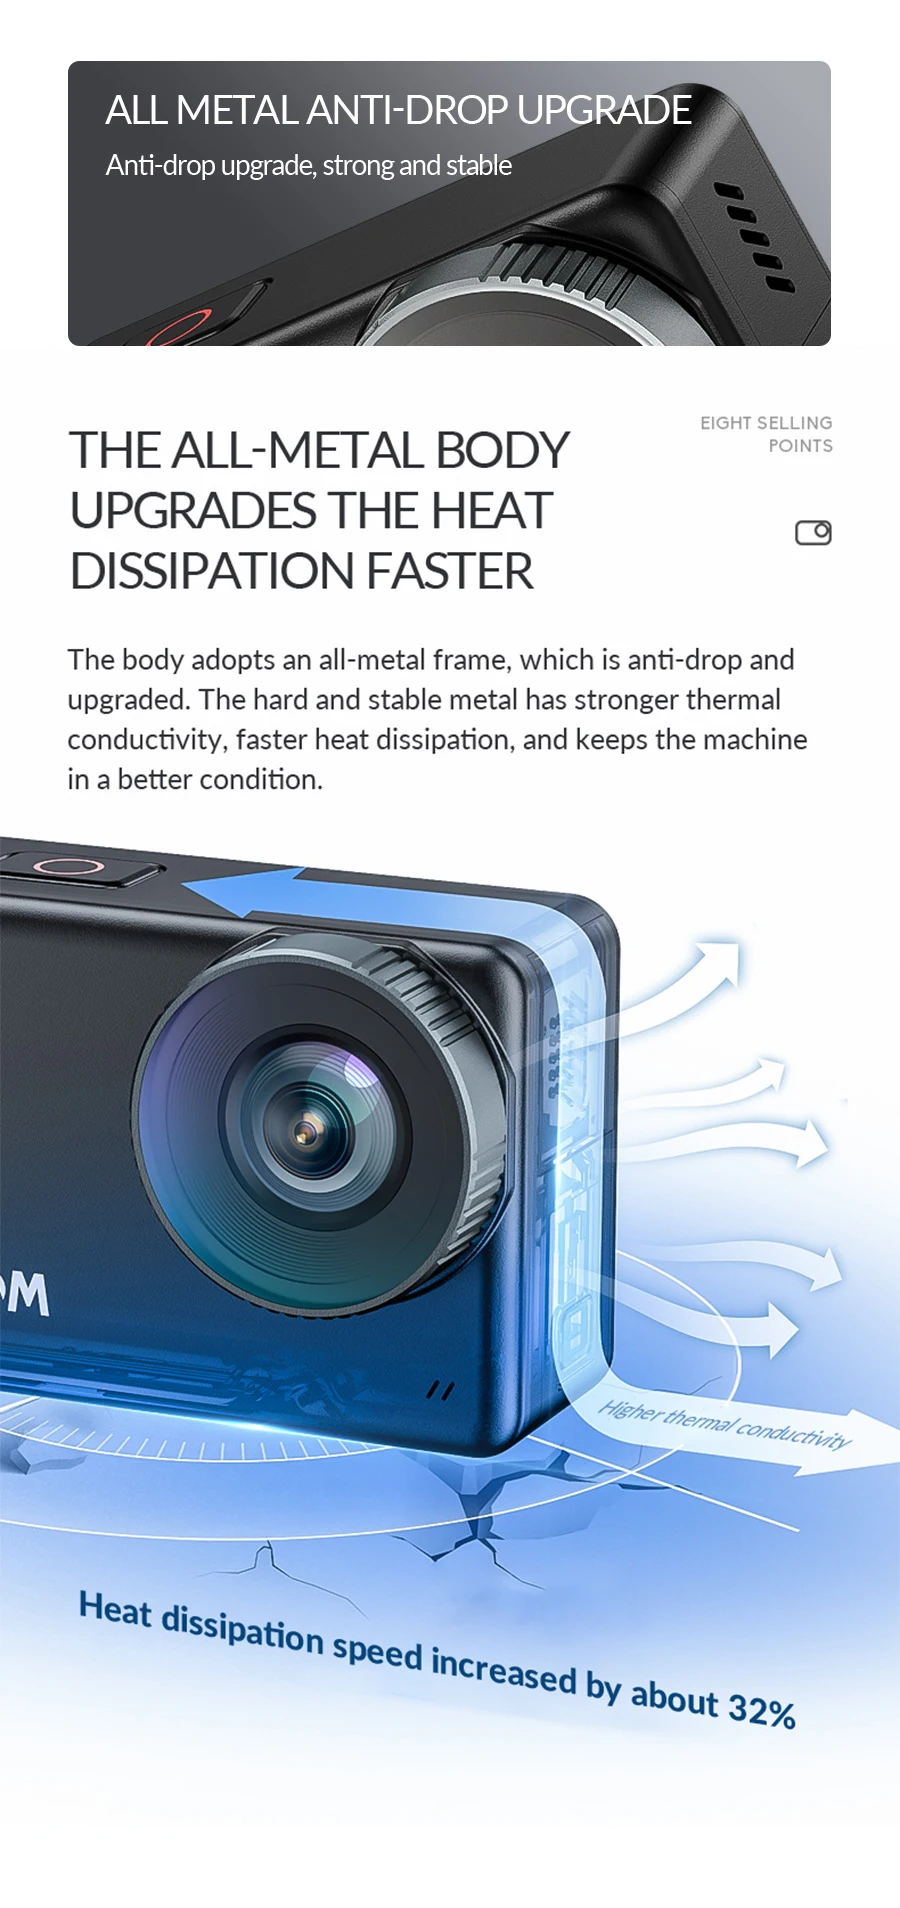 cheapest action camera Original SJCAM SJ10 Pro Action Camera 4K 60FPS WiFi GYRO Live Streaming Touch Screen 8x Zoom 10 Meters Body Waterproof Sports DV action camera battery life